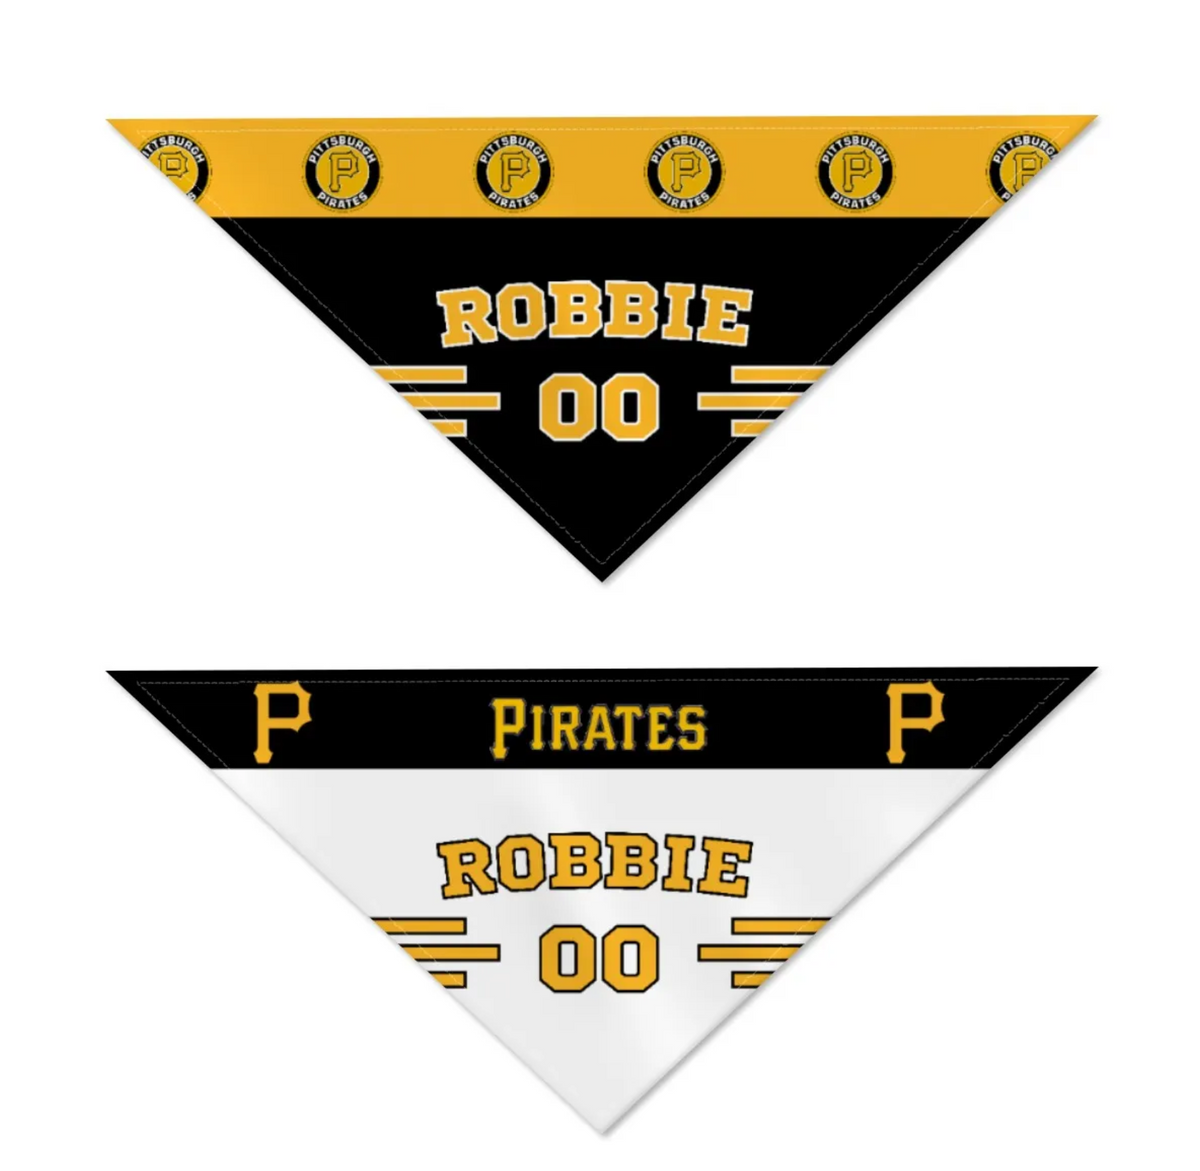 Pittsburgh Pirates Home/Road Personalized Reversible Bandana - 3 Red Rovers